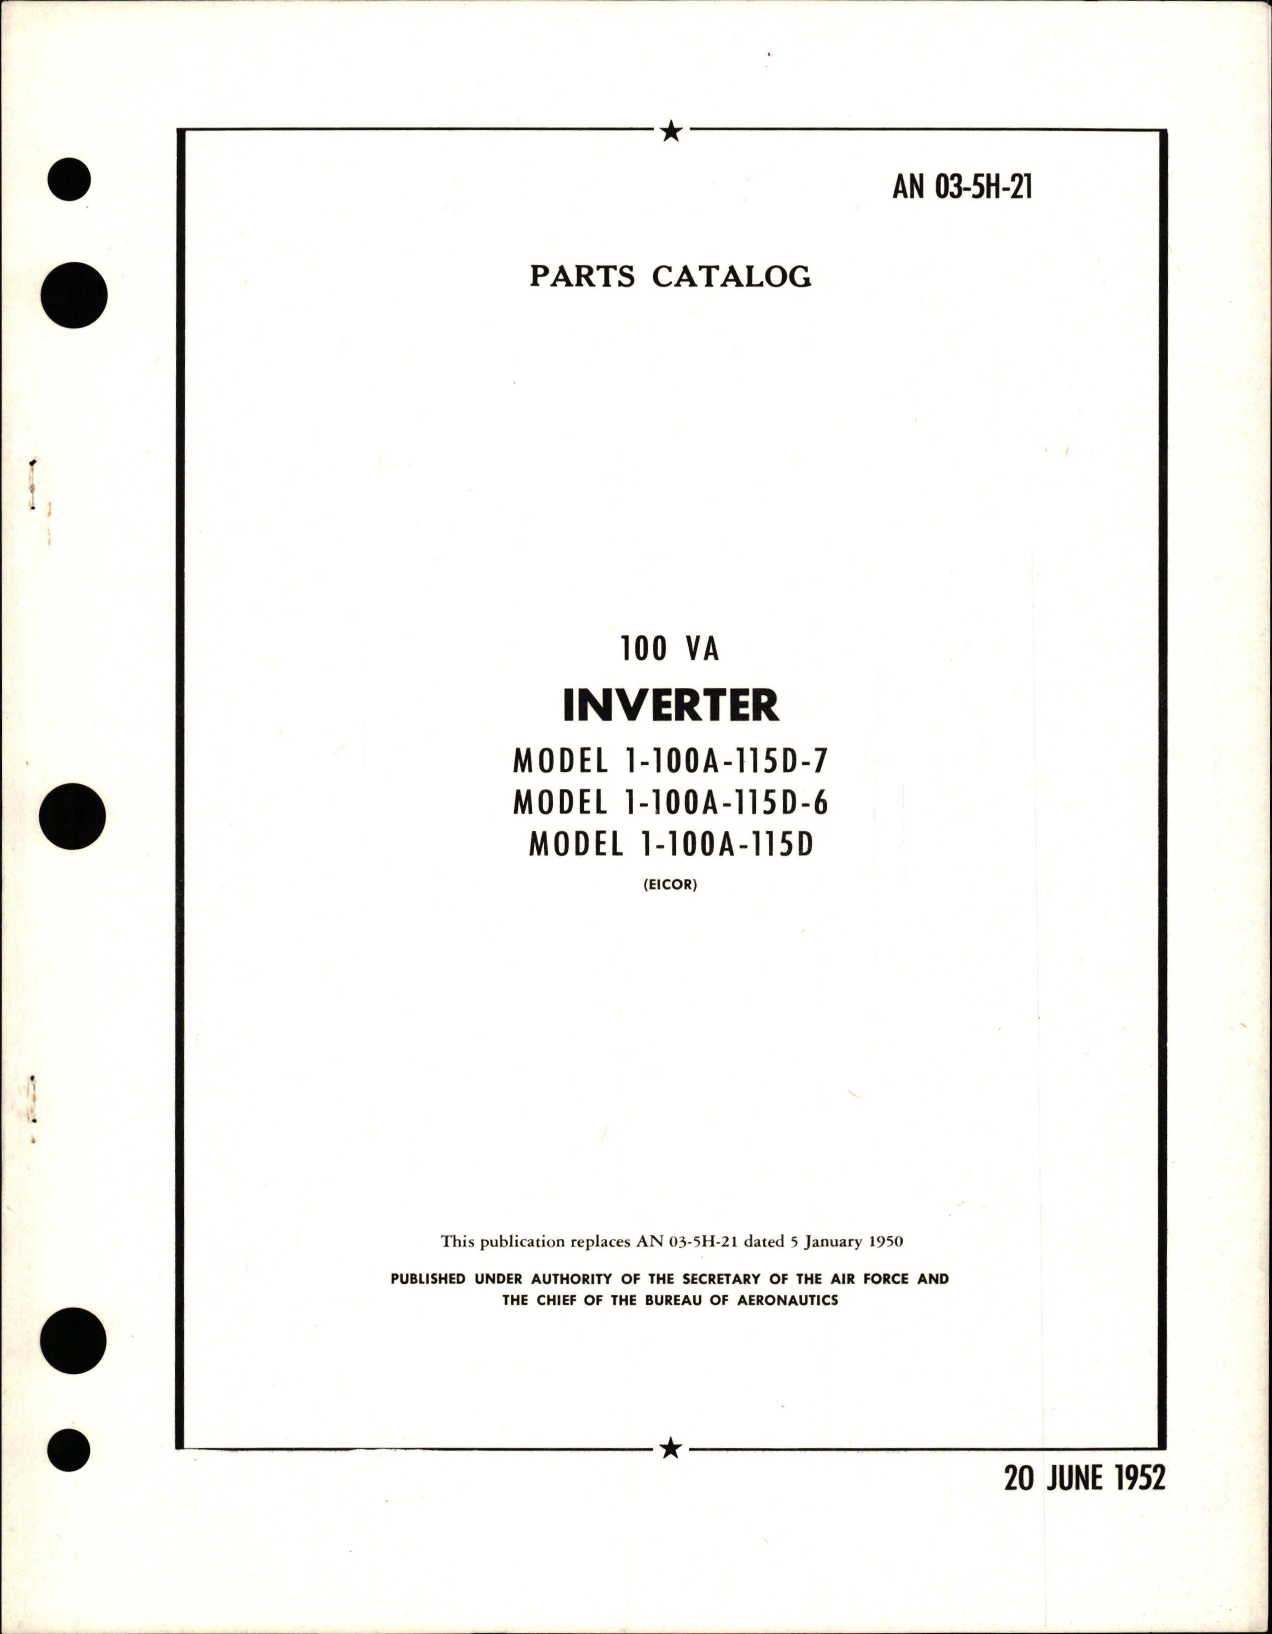 Sample page 1 from AirCorps Library document: Parts Catalog for Inverter - 100 VA - Models 1-100A-115D, 1-100A-115D-7, and 1-100A-115D-6